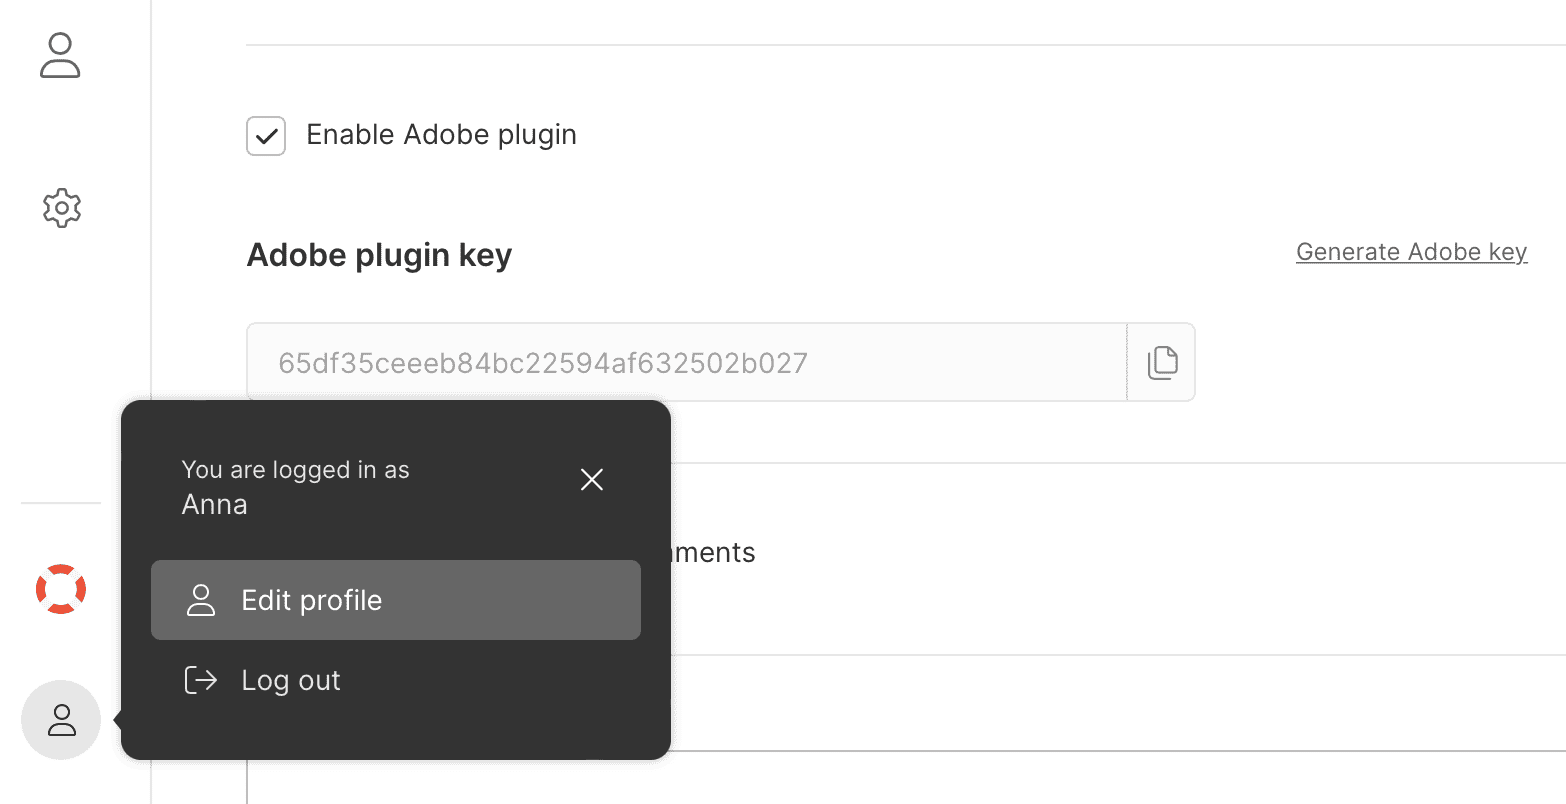 Activating Adobe plugin key in Kontainer